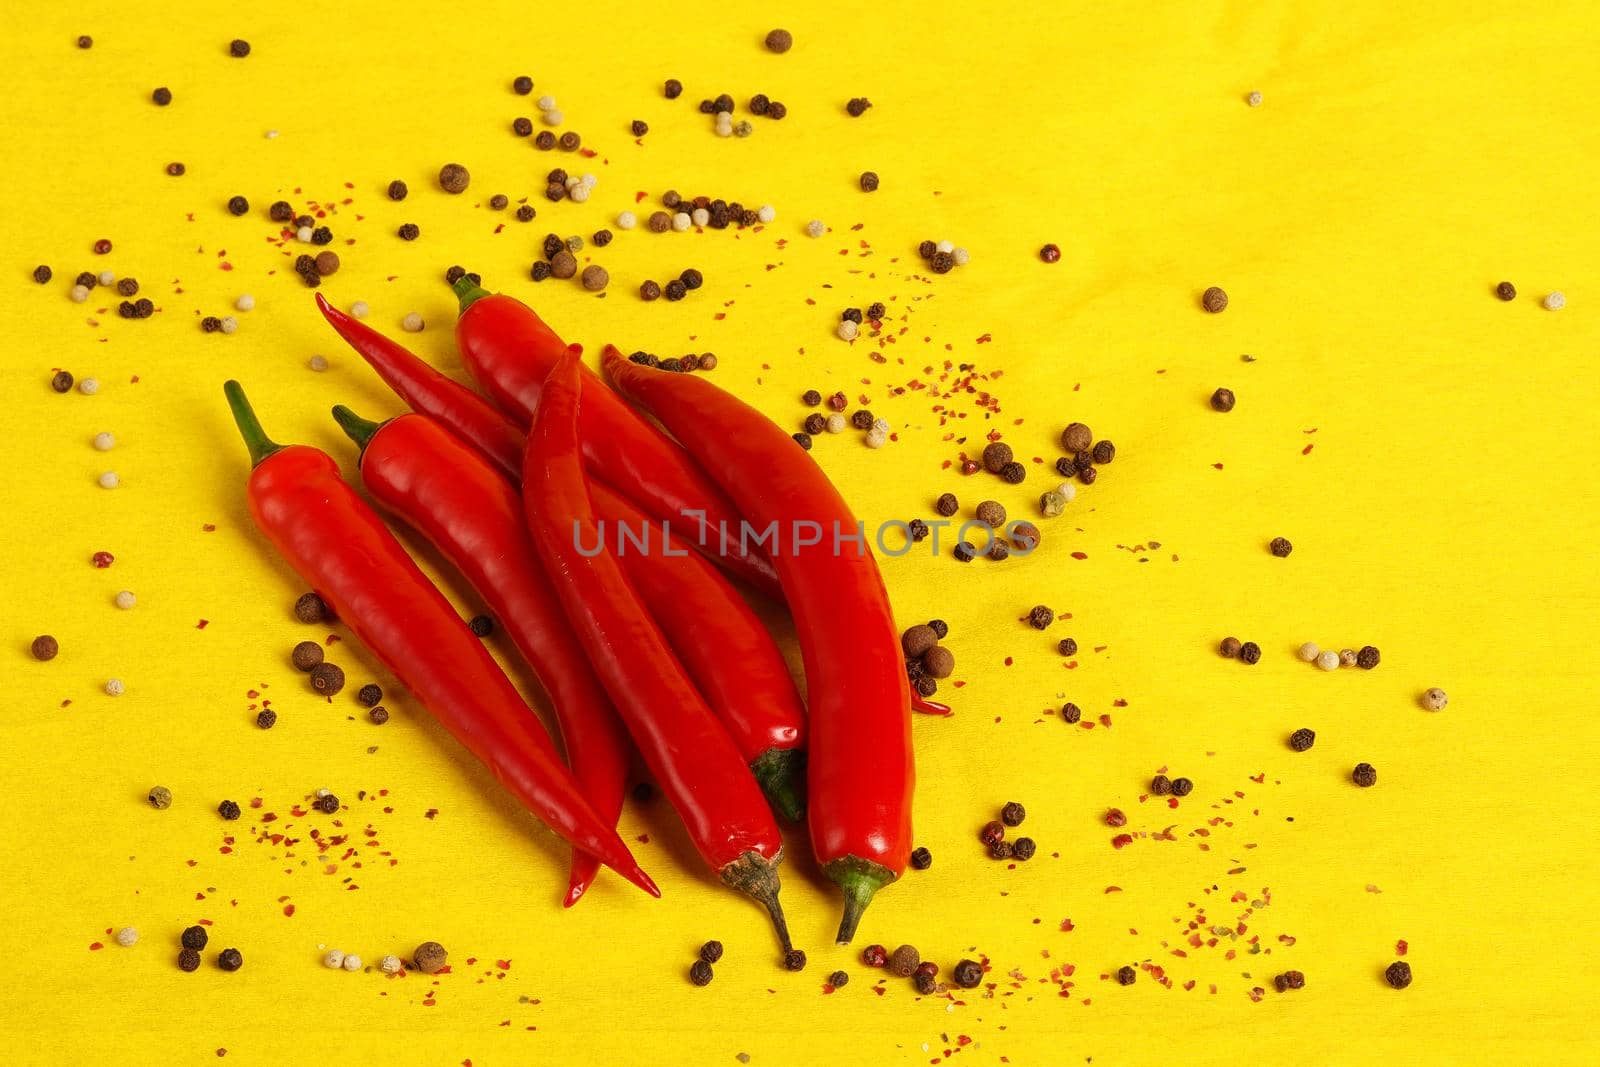 Red chili peppers on a yellow background, a place for inscription. by Olga26